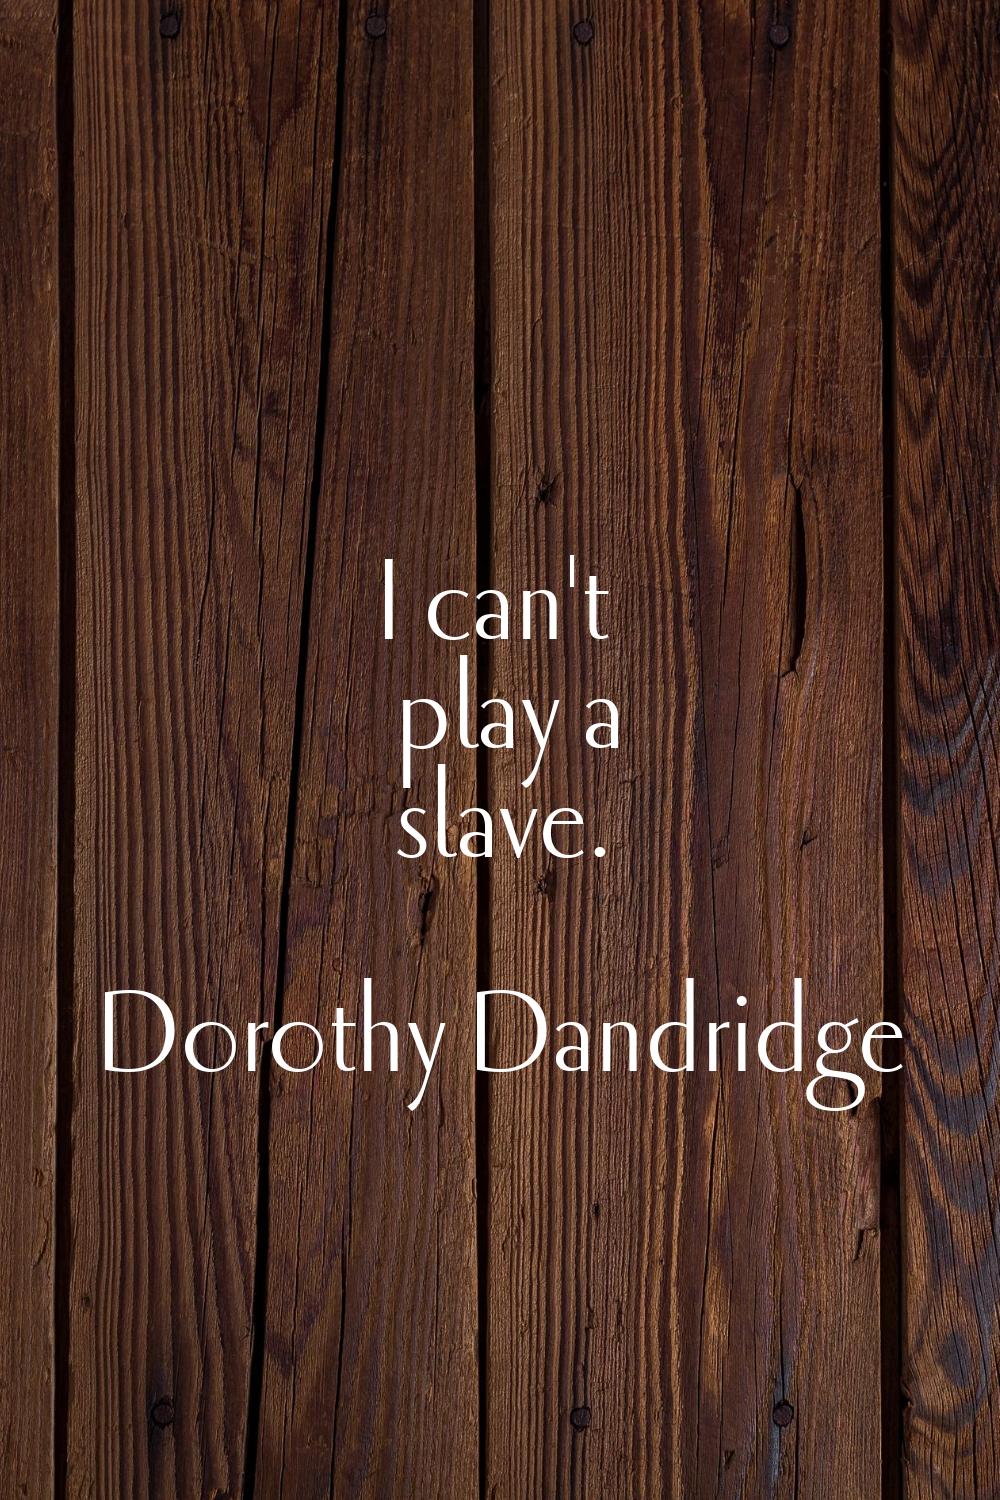 I can't play a slave.